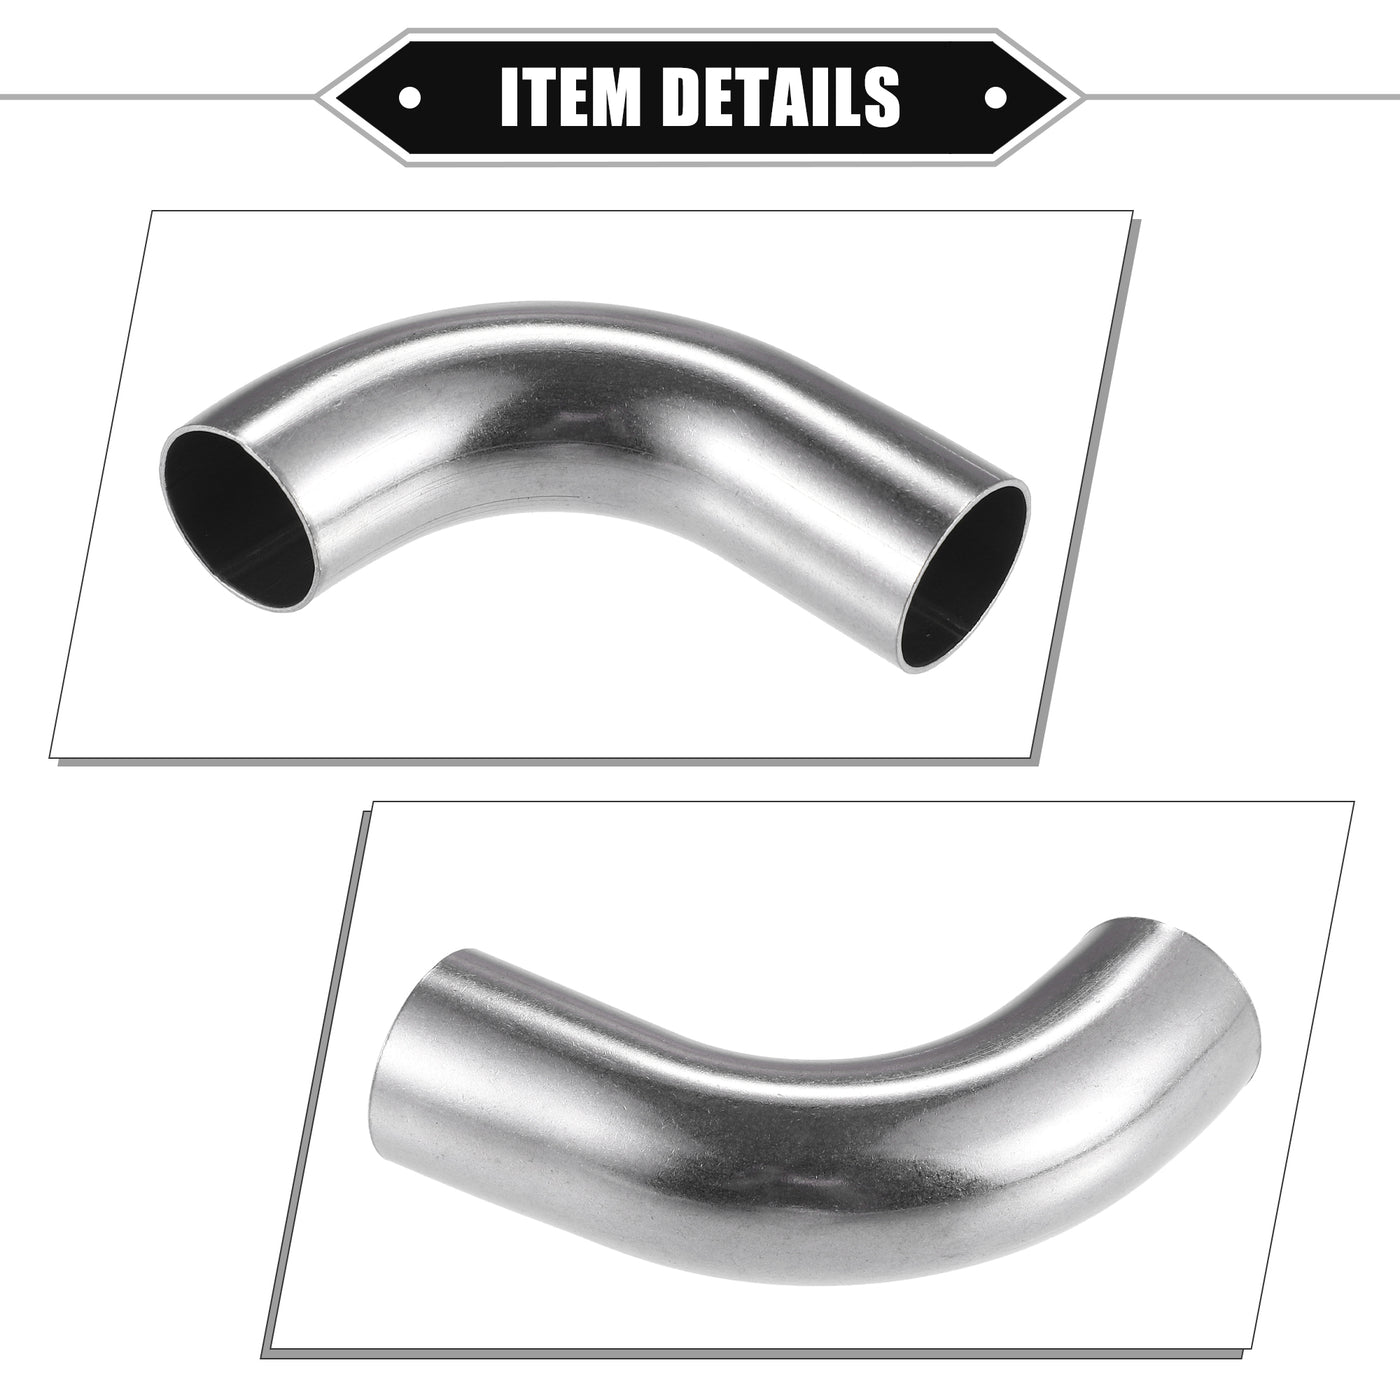 VekAuto 2 Pcs Bend Elbow Pipe Tube, 1" OD 3.15" 2.36" Leg 90 Degree DIY Exhaust Pipe Intercooler Air Intake Tube Universal for Car Truck Durable 304 Stainless Steel Silver Tone